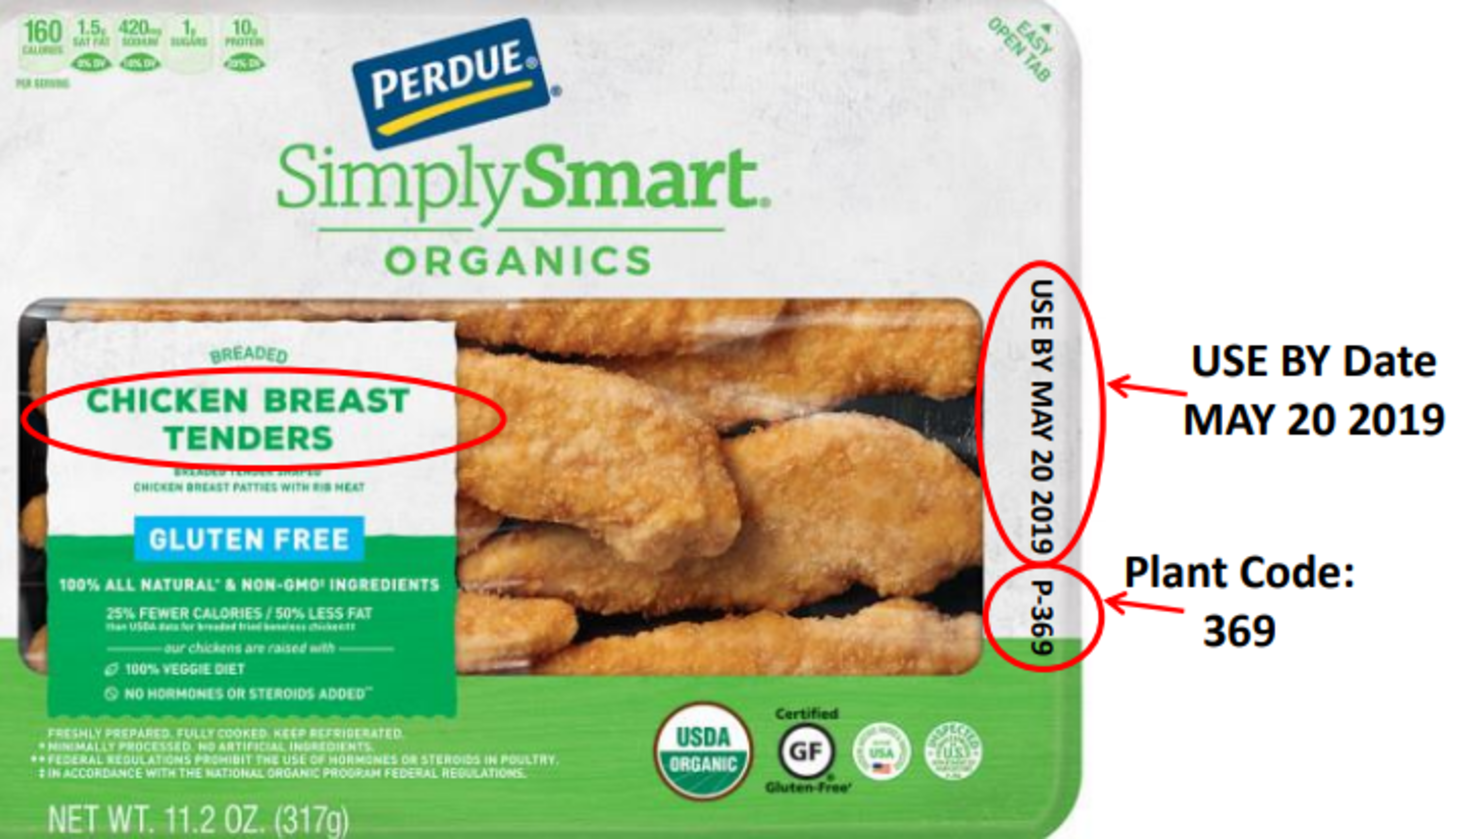 Perdue Foods Recalls Nearly 32,000 Pounds of ReadyToEat Chicken